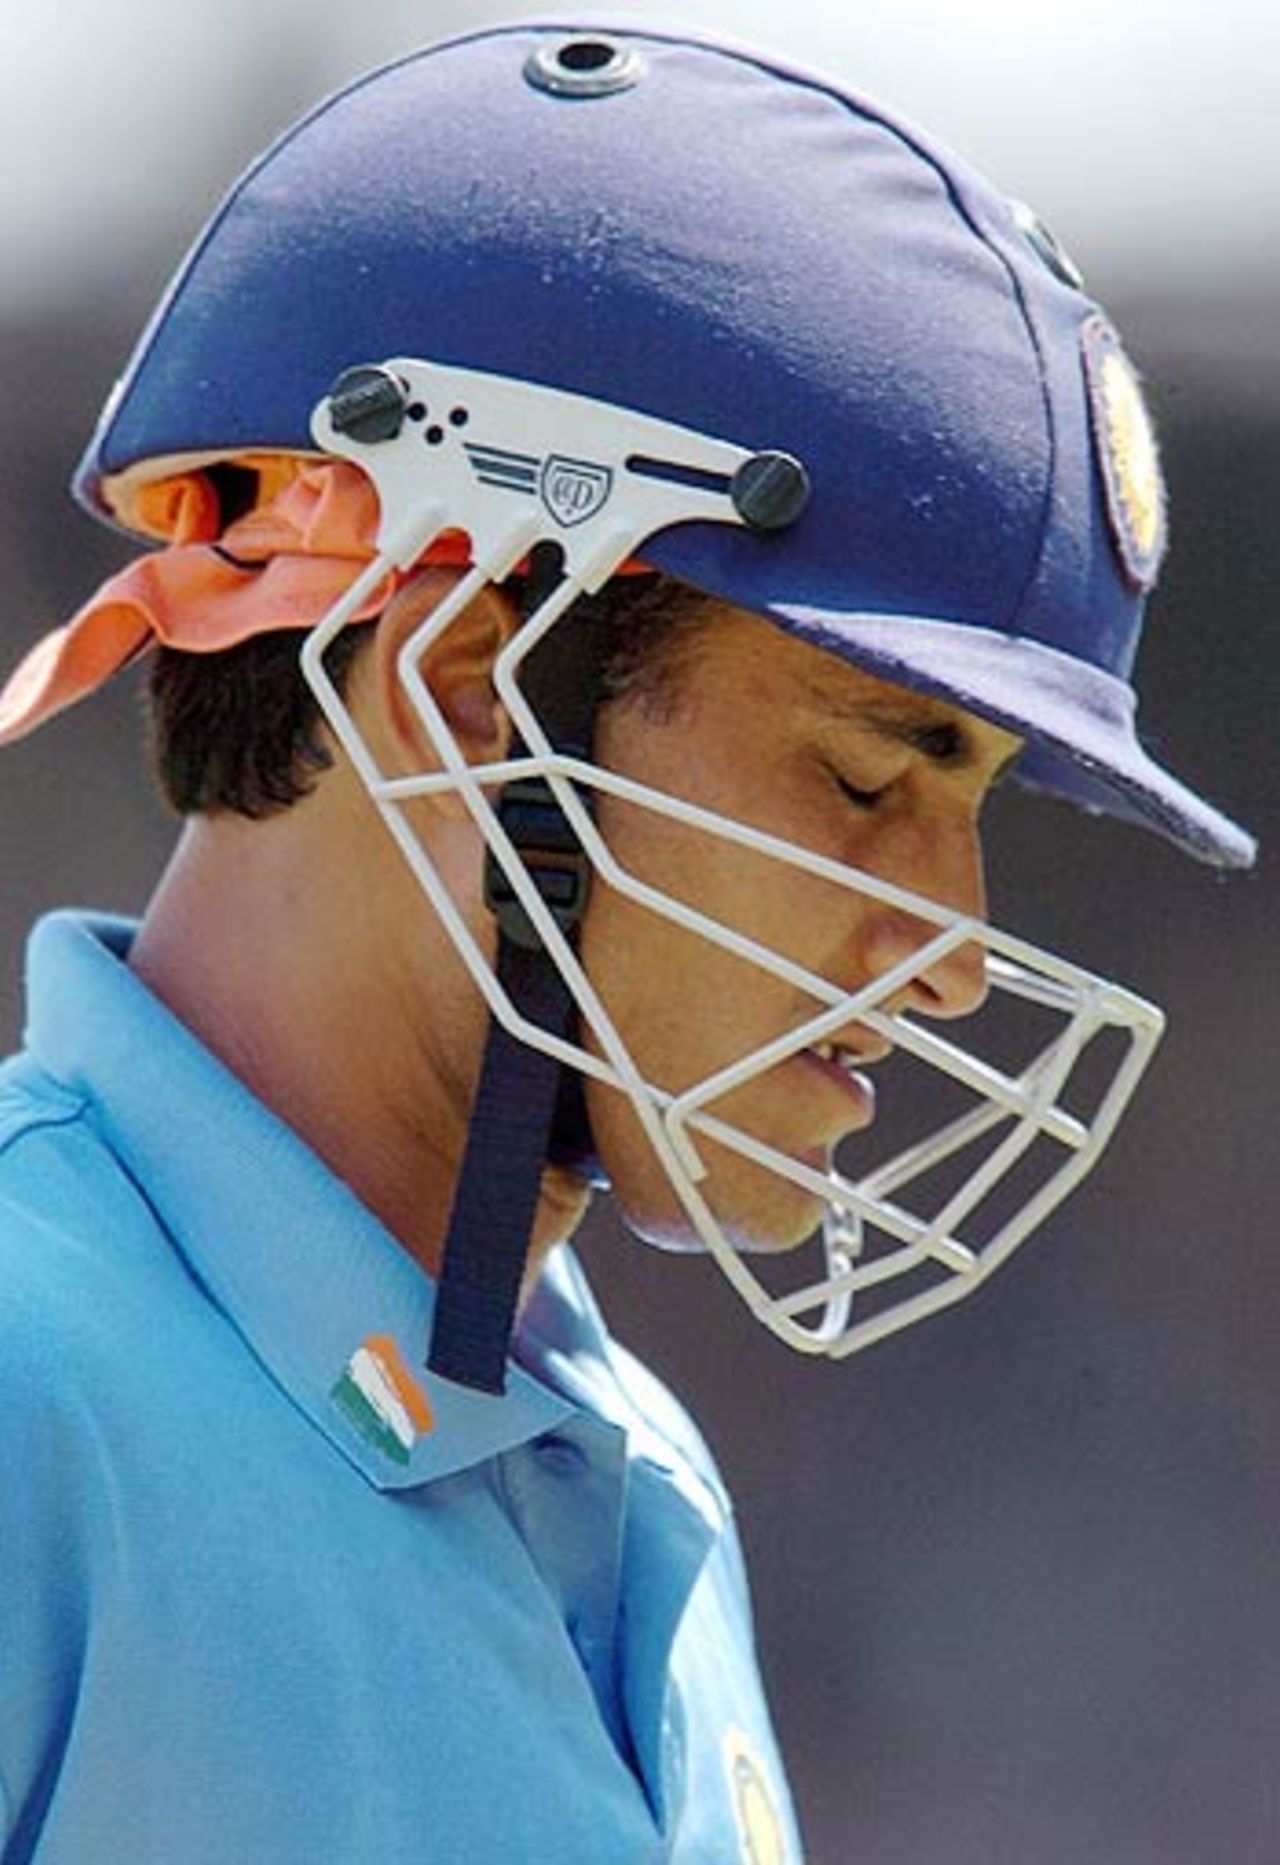 Sourav Ganguly's horrible form continued, as he made just 9, India v Pakistan, 2nd ODI, Visakhapatnam, April 5, 2005